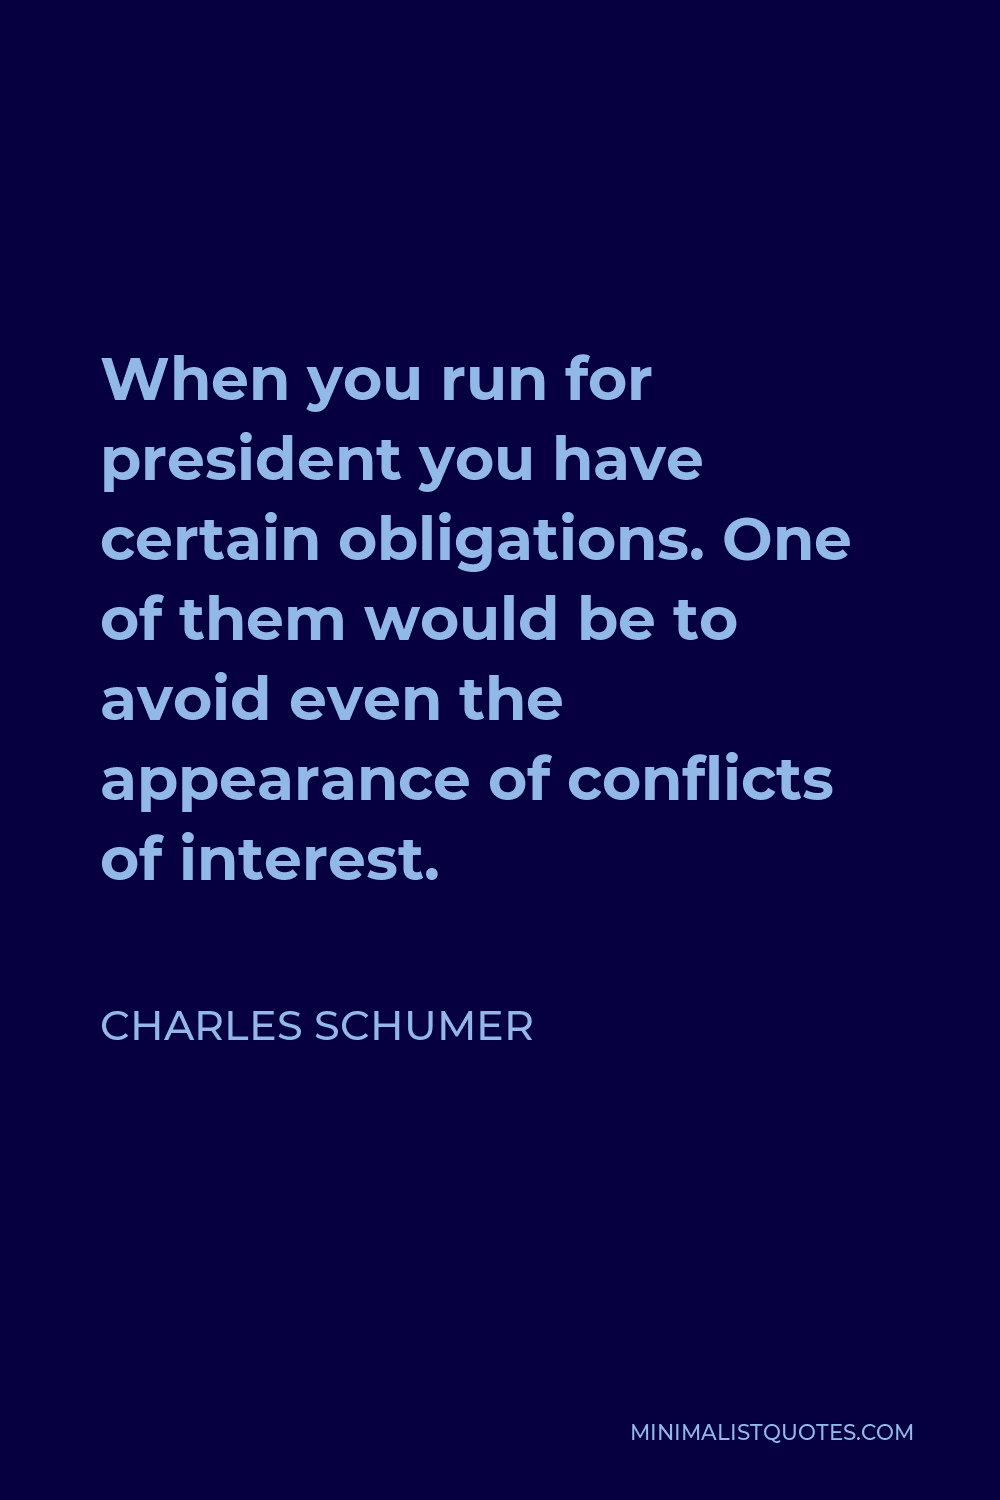 Charles Schumer Quote - When you run for president you have certain obligations. One of them would be to avoid even the appearance of conflicts of interest.